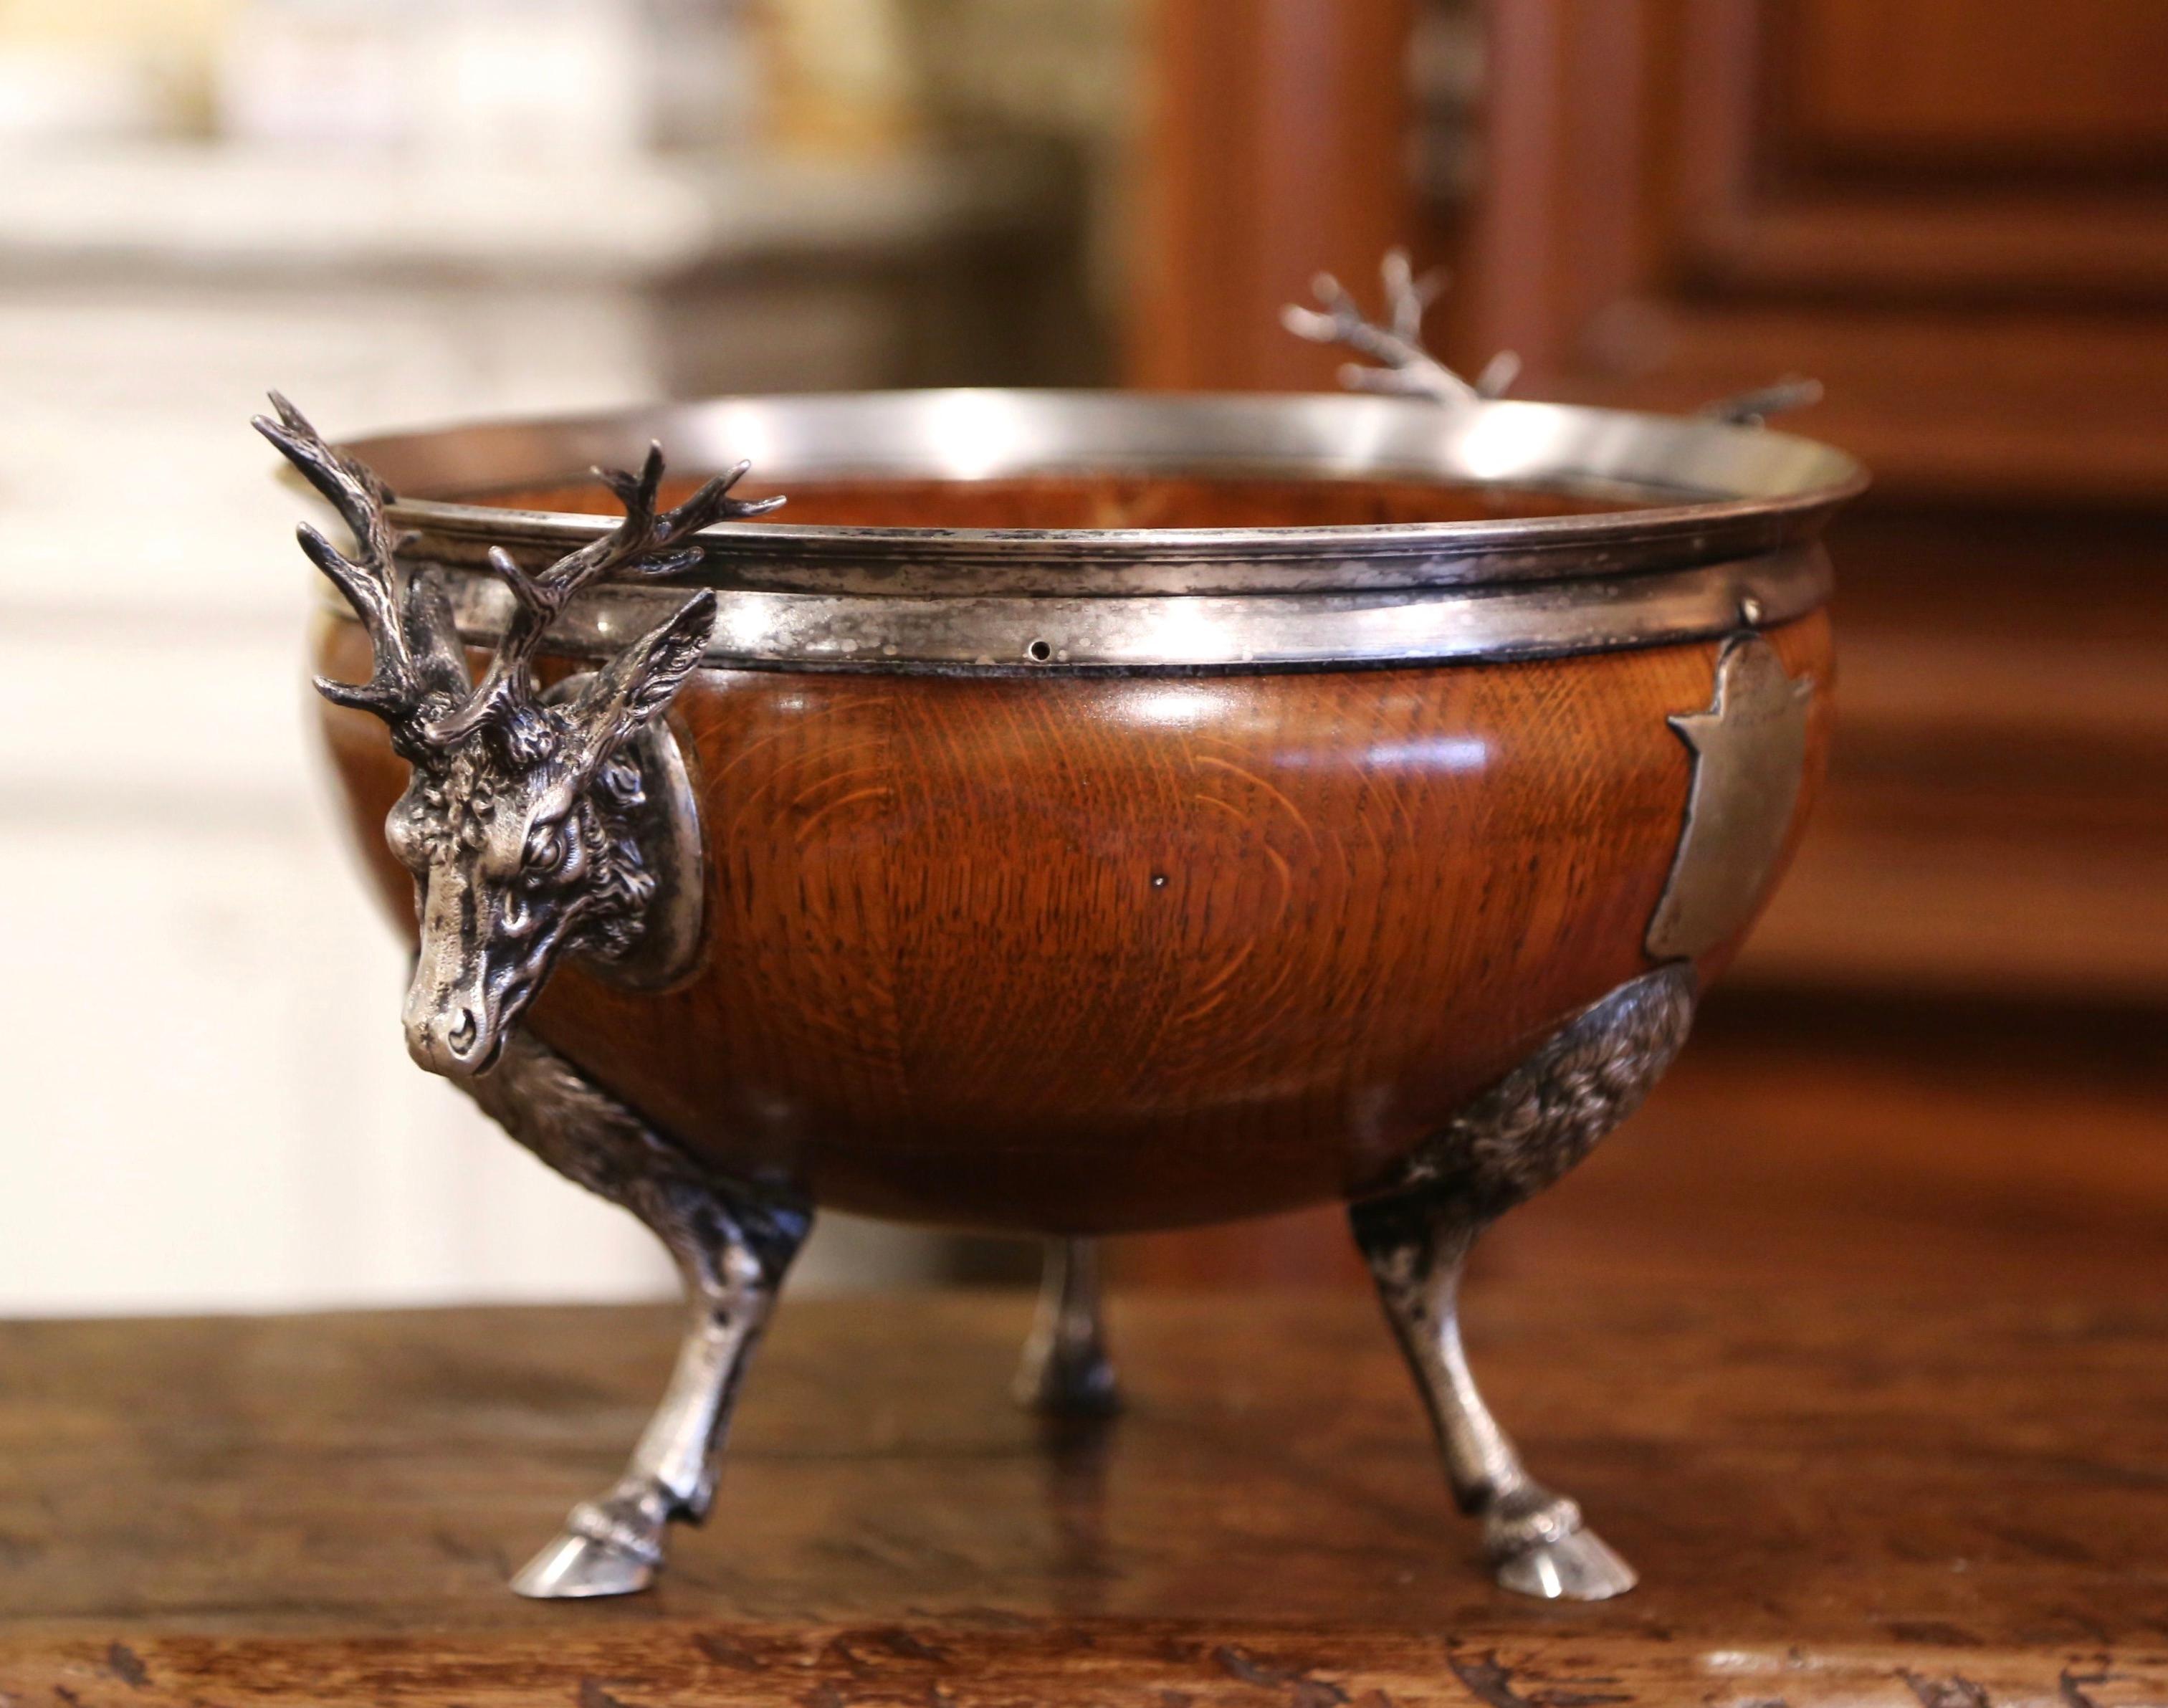 Hand-Crafted 19th Century English Wooden and Silver Plated Bowl on Hoof Feet with Deer Motifs